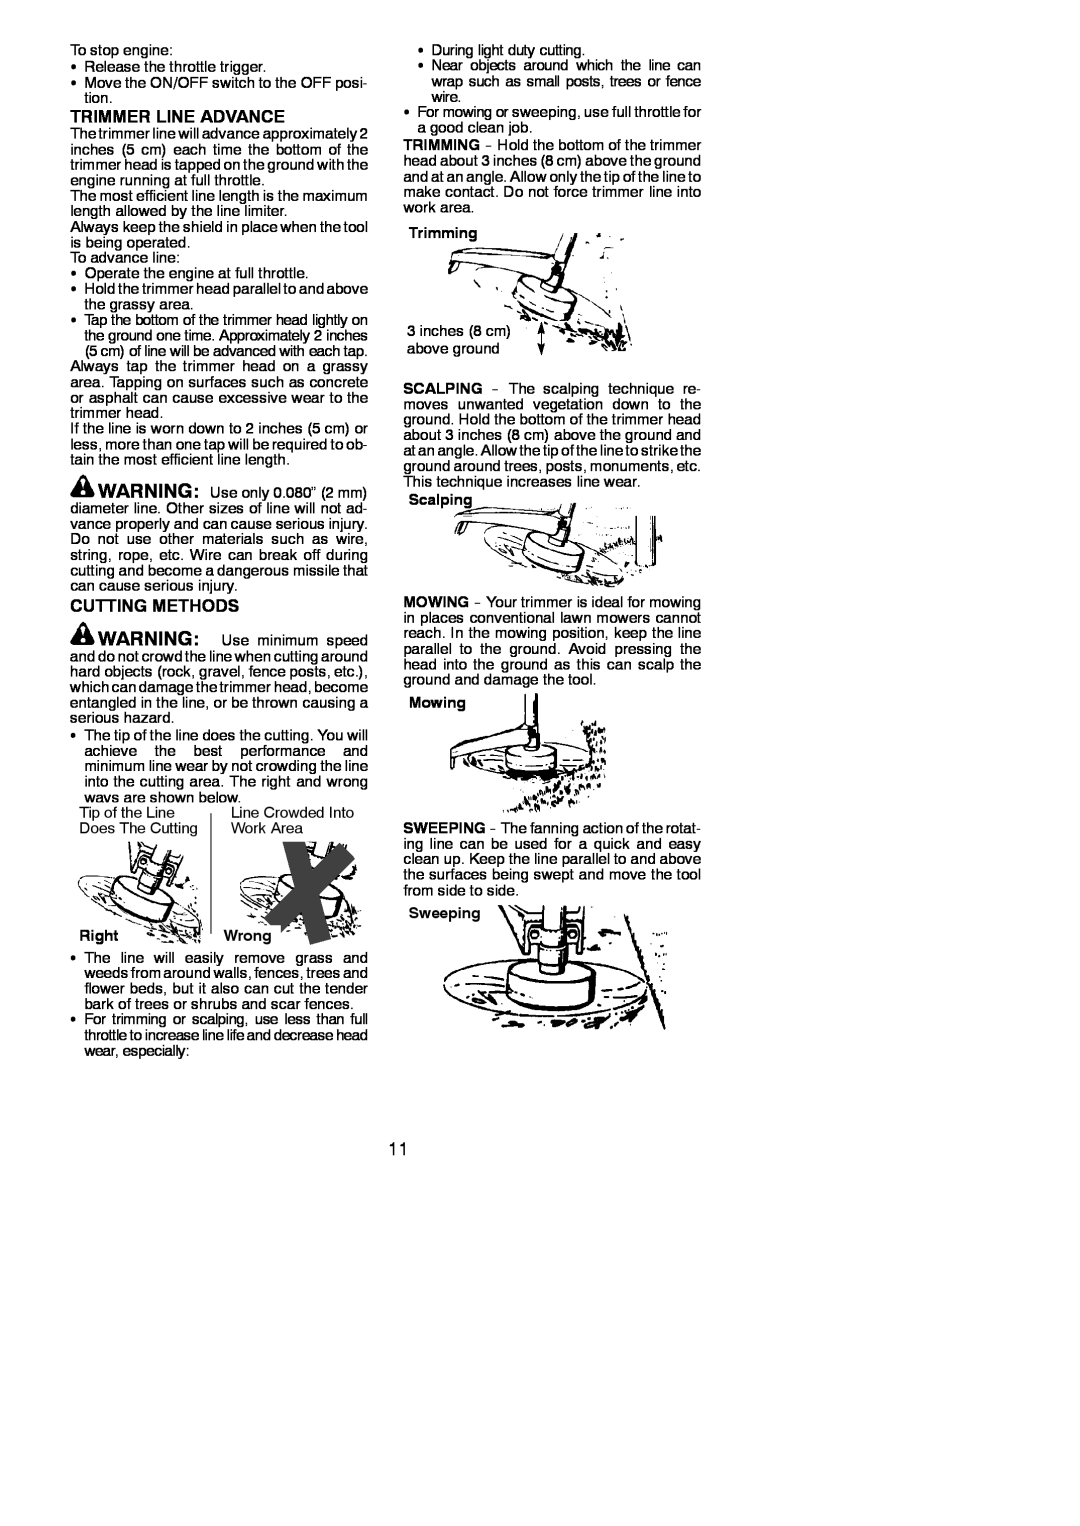 Poulan 545123423 instruction manual Trimmer Line Advance, Cutting Methods, RightWrong, Trimming, Scalping, Mowing, Sweeping 